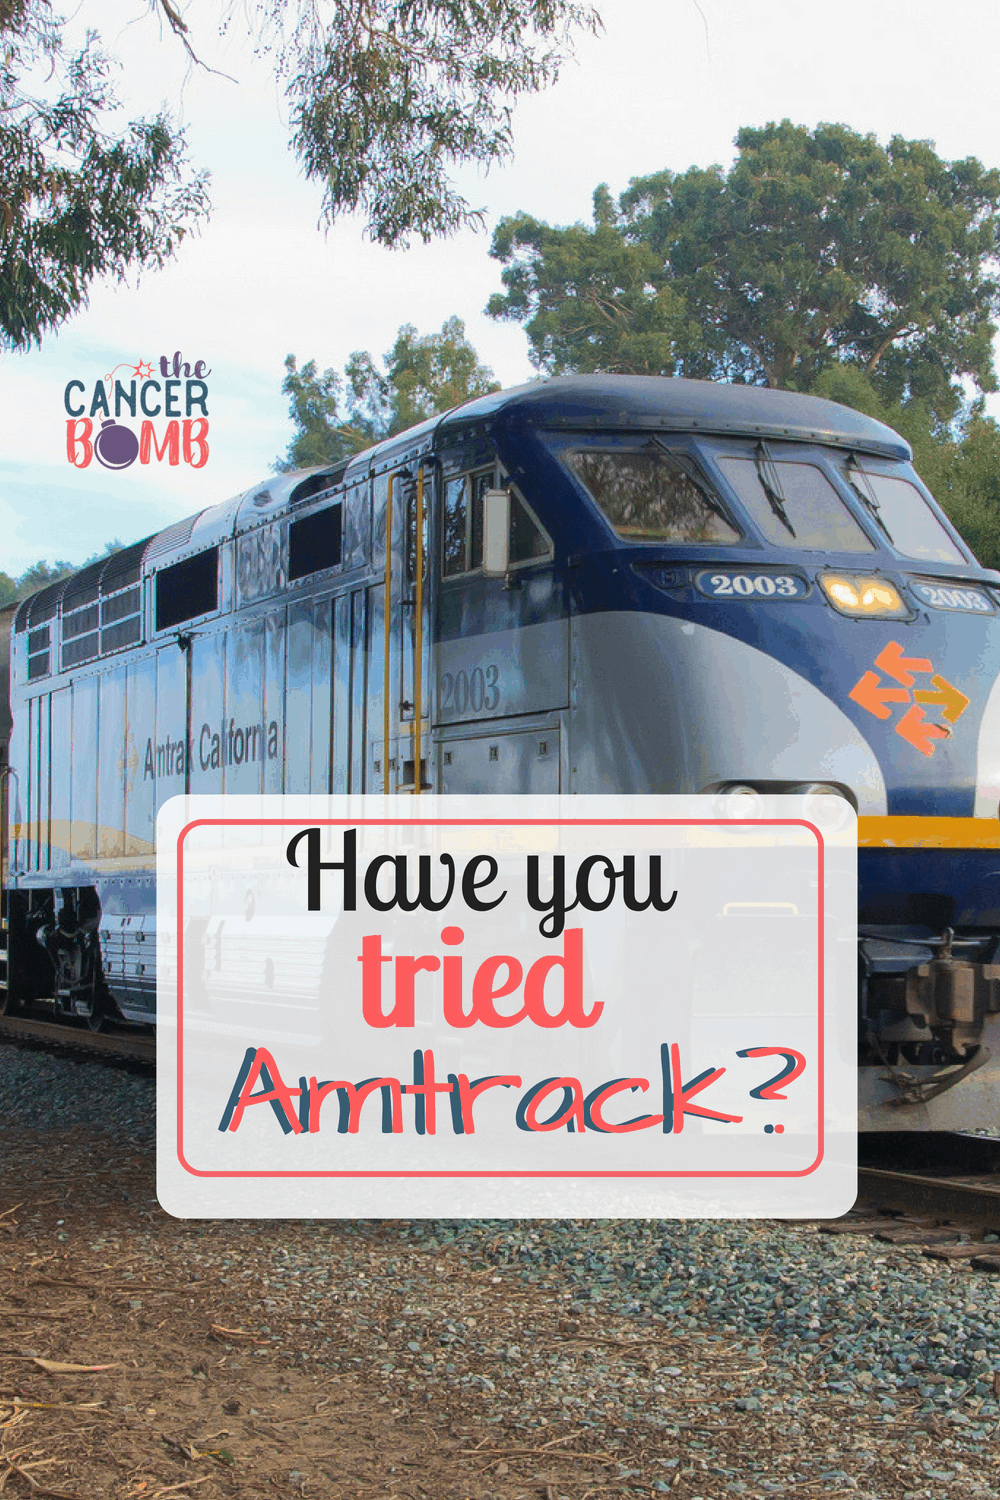  If your destination is NYC, Amtrak is the absolute best idea for getting in and out of the City as easy as possible. #amtrack #destinationNYC #takeatrain #giveamtrackatry #easierwaystotravel #redcap